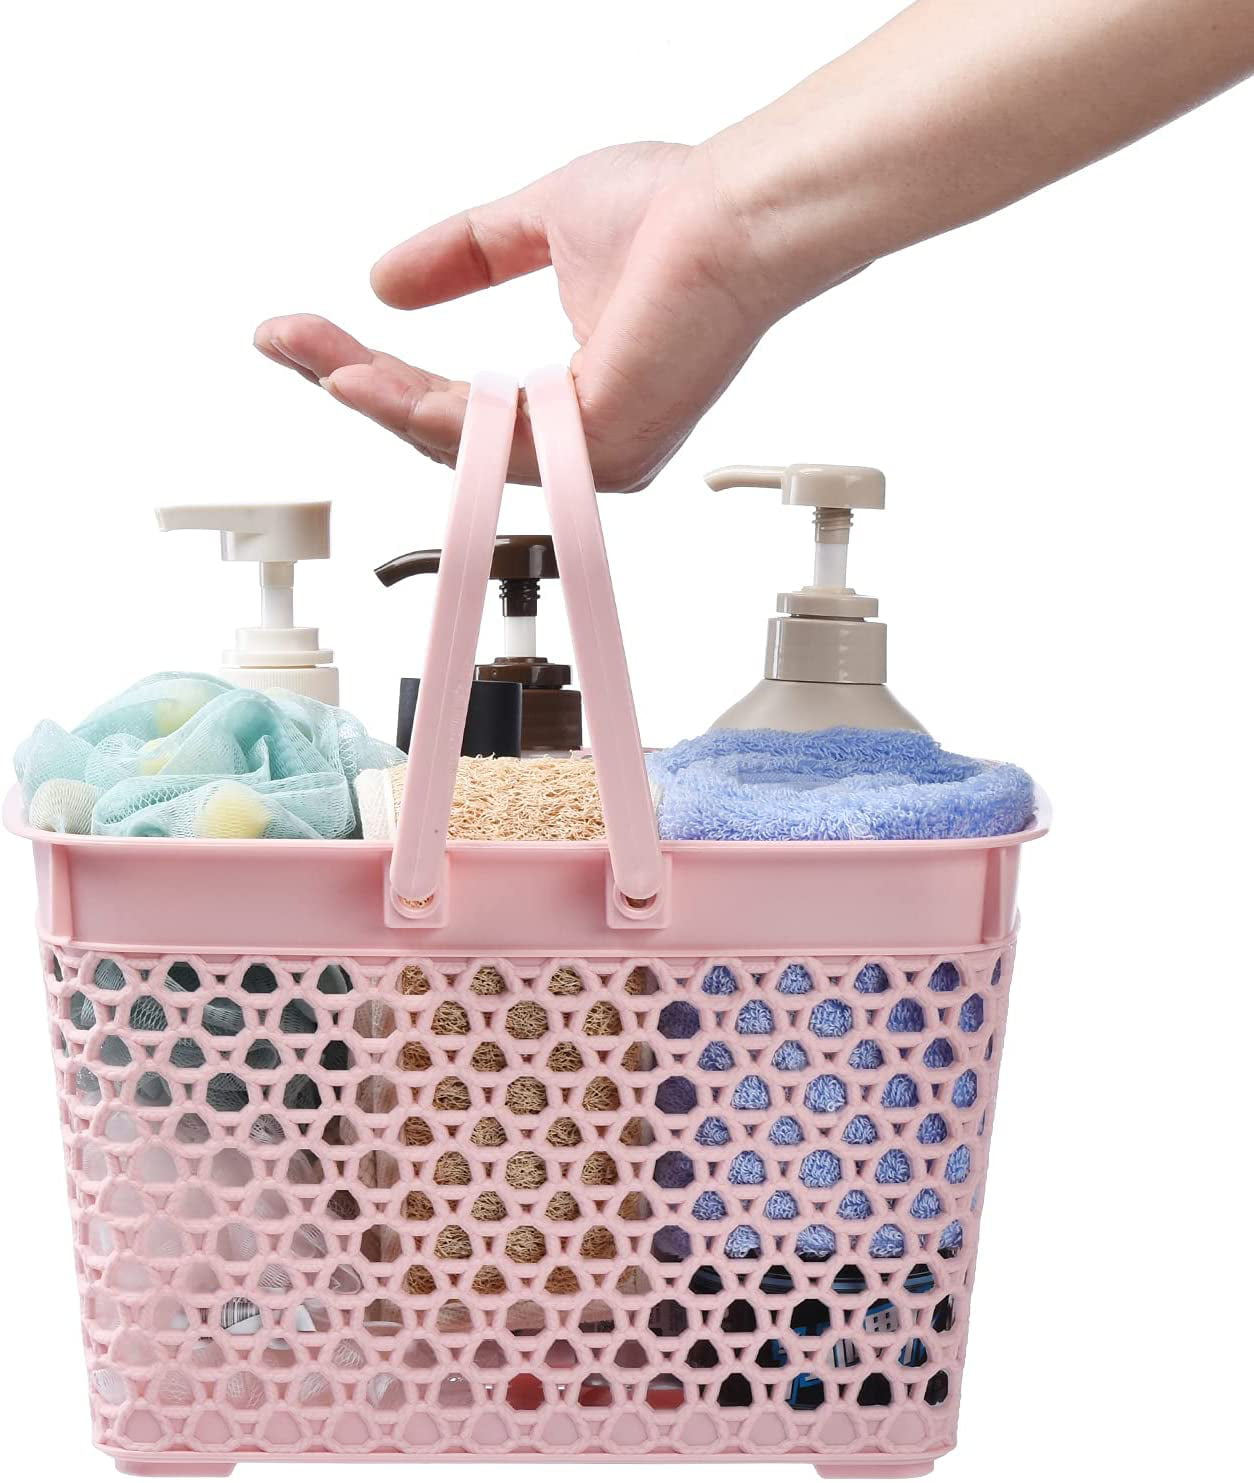 WOAIWOJIA Large Plastic cleaning caddy Basket Portable Shower Caddy Tote  Organizer Basket with Handle for Bathroom, Bedroom, Kitchen, College Dorm